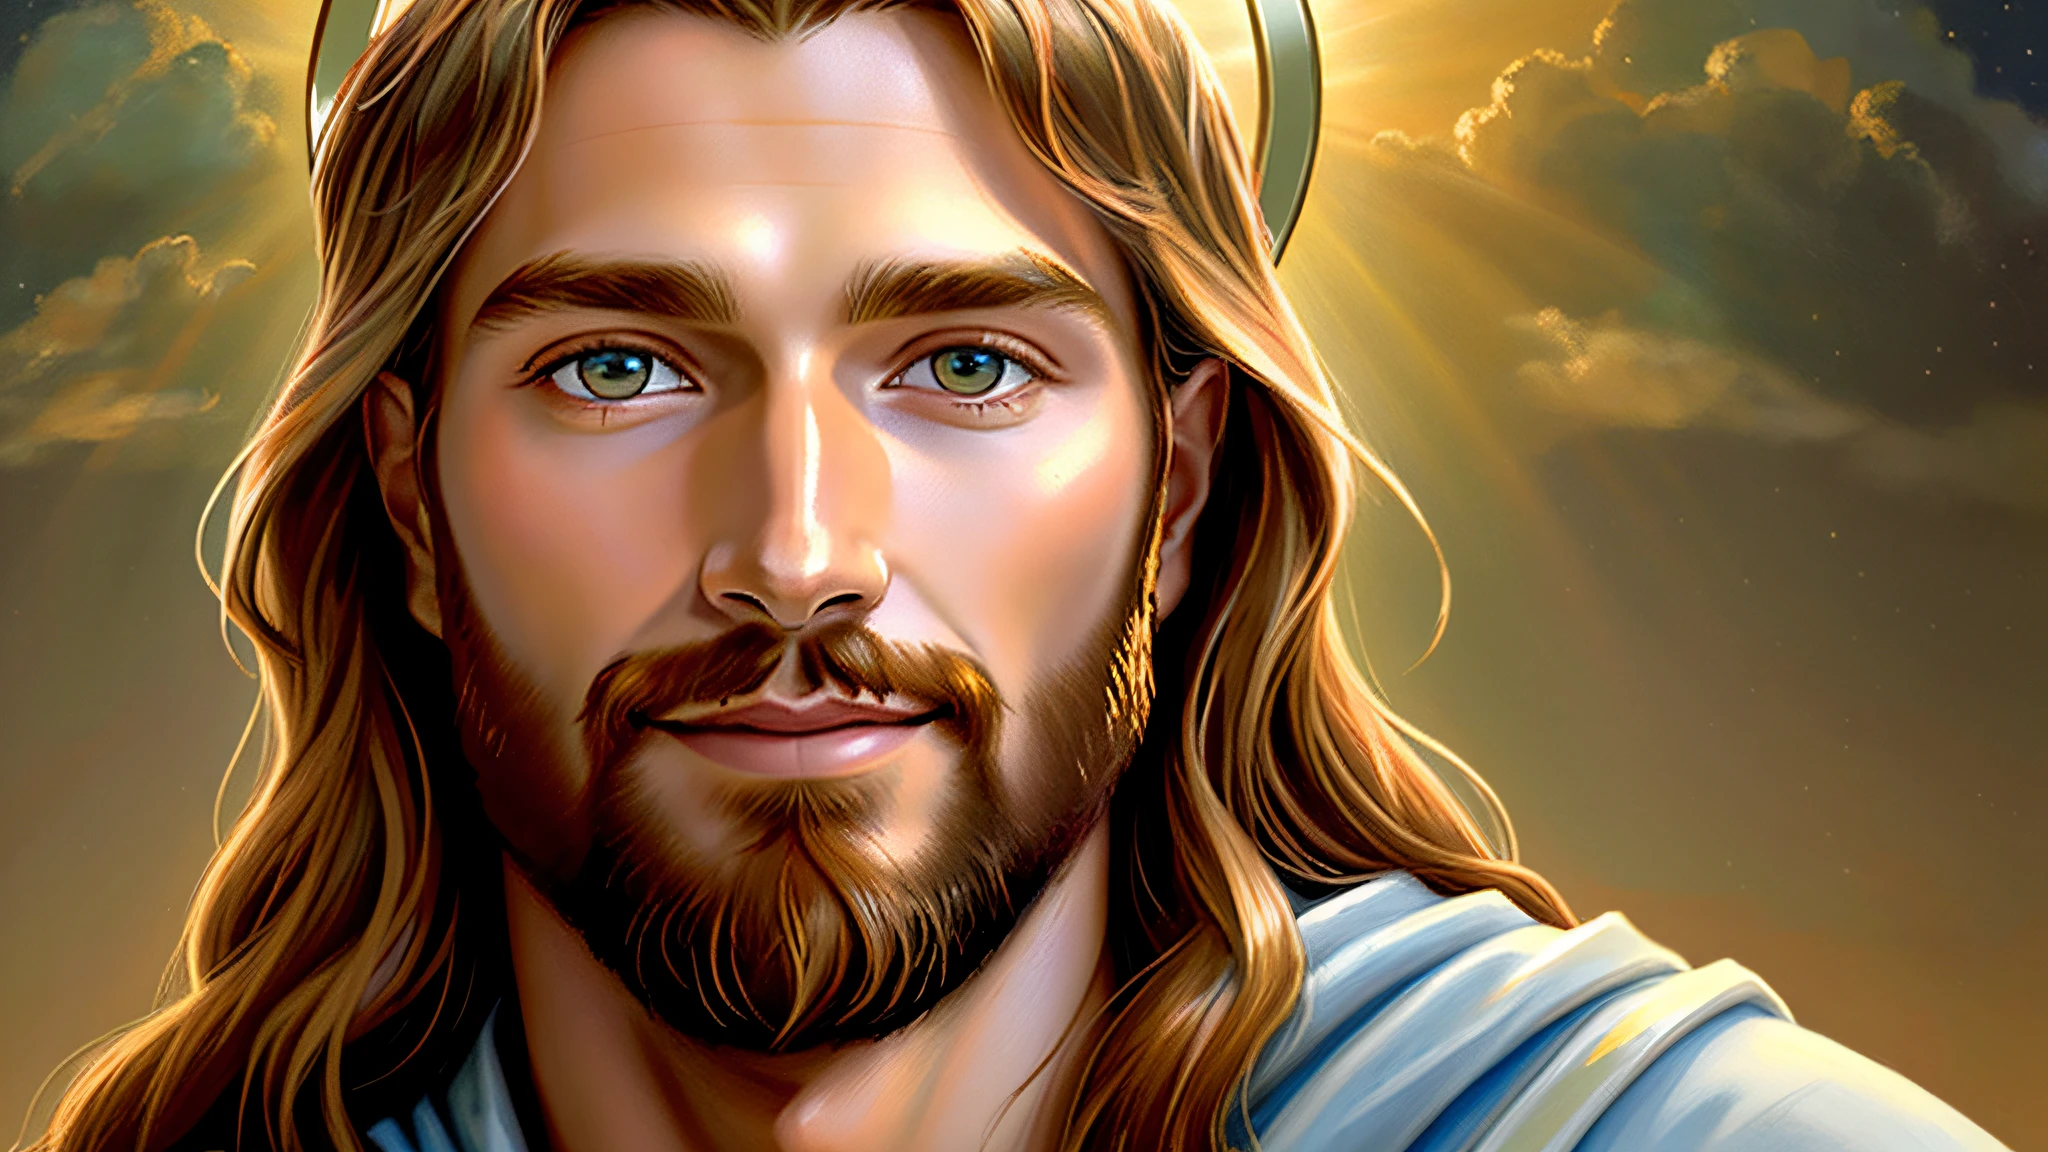 A painting of Jesus with a halo in heaven, Jesus Christ, Smiling in heaven, Portrait of Jesus Christ, Face of Jesus, Young God Almighty, Portrait of a Heavenly God, Greg Olsen, Jesus Gigachad, Jesus of Nazareth, Jesus, The face of God, God looking at me